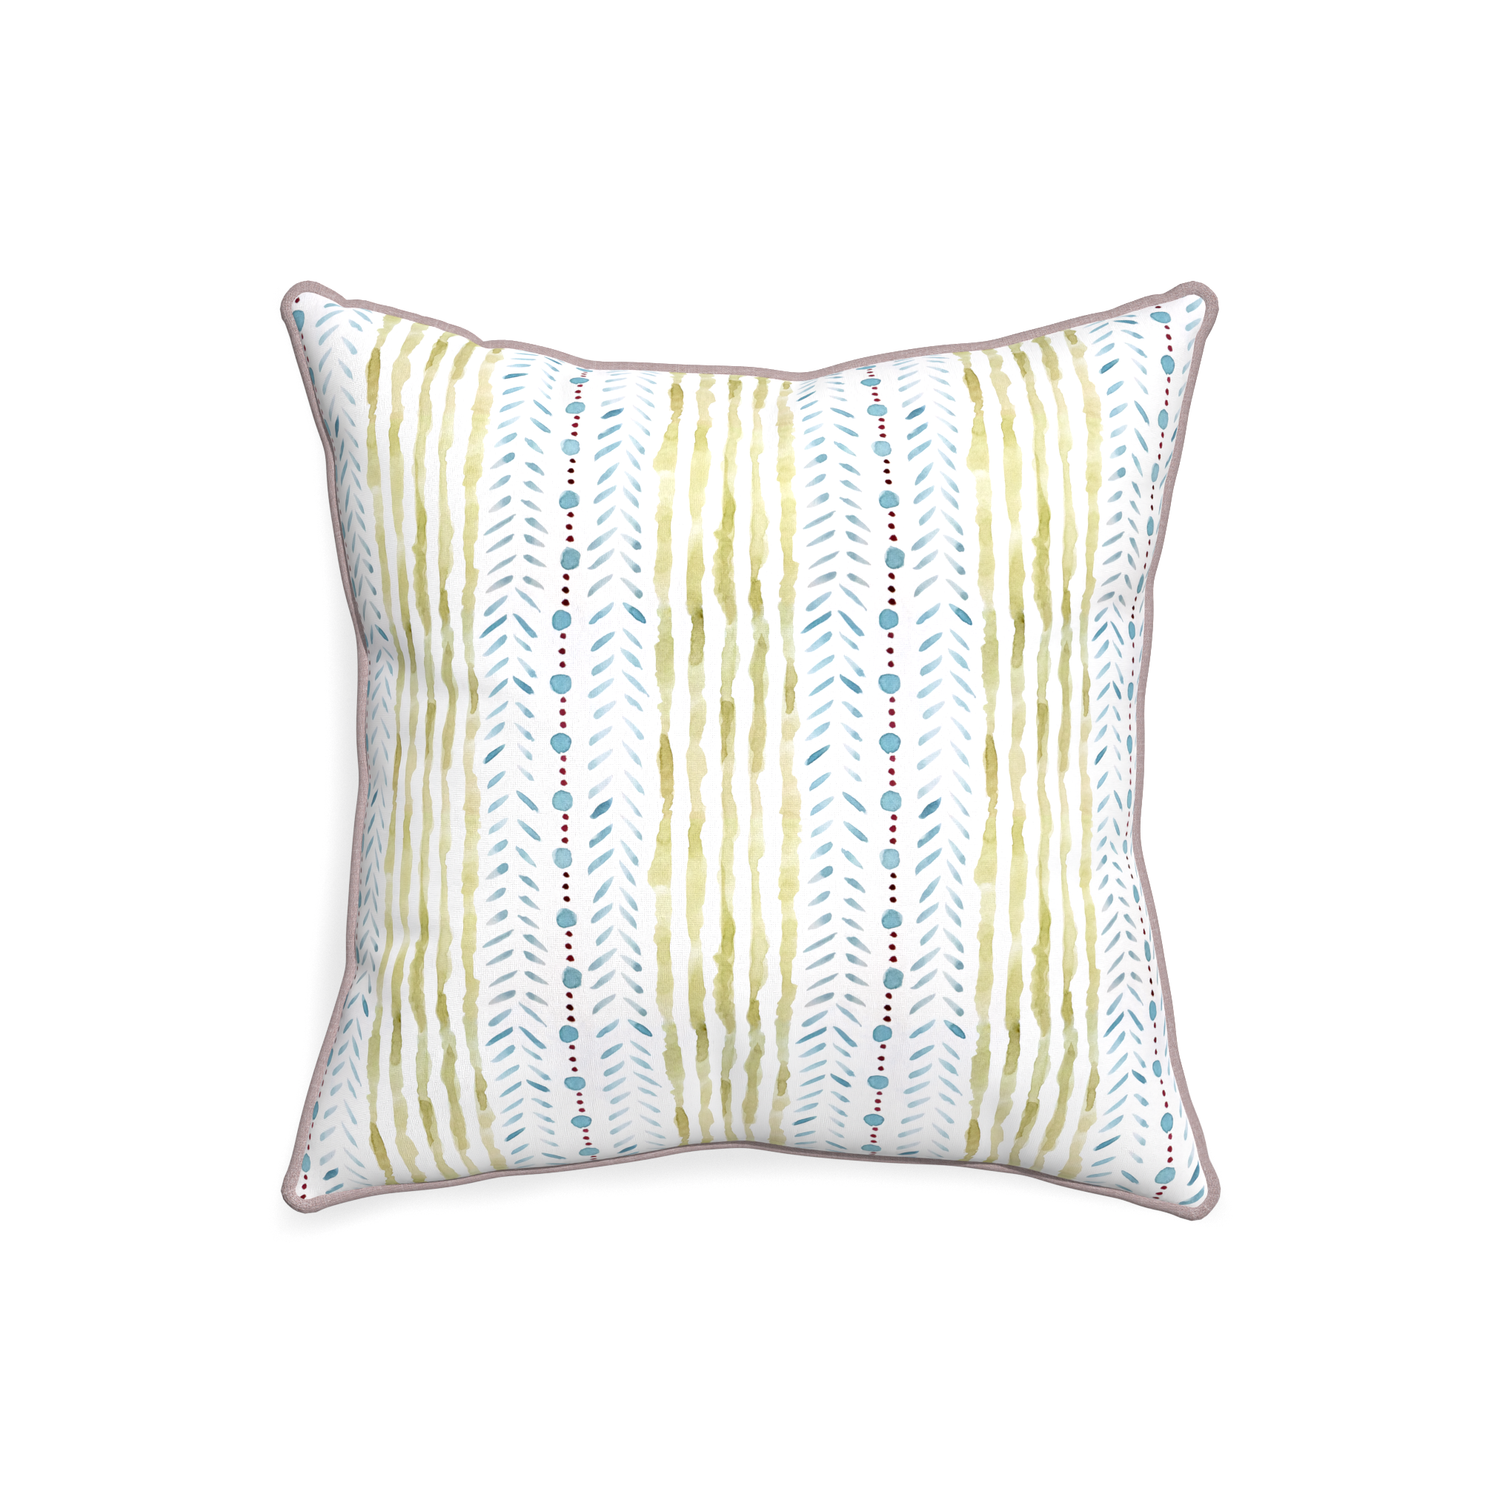 20-square julia custom blue & green stripedpillow with orchid piping on white background